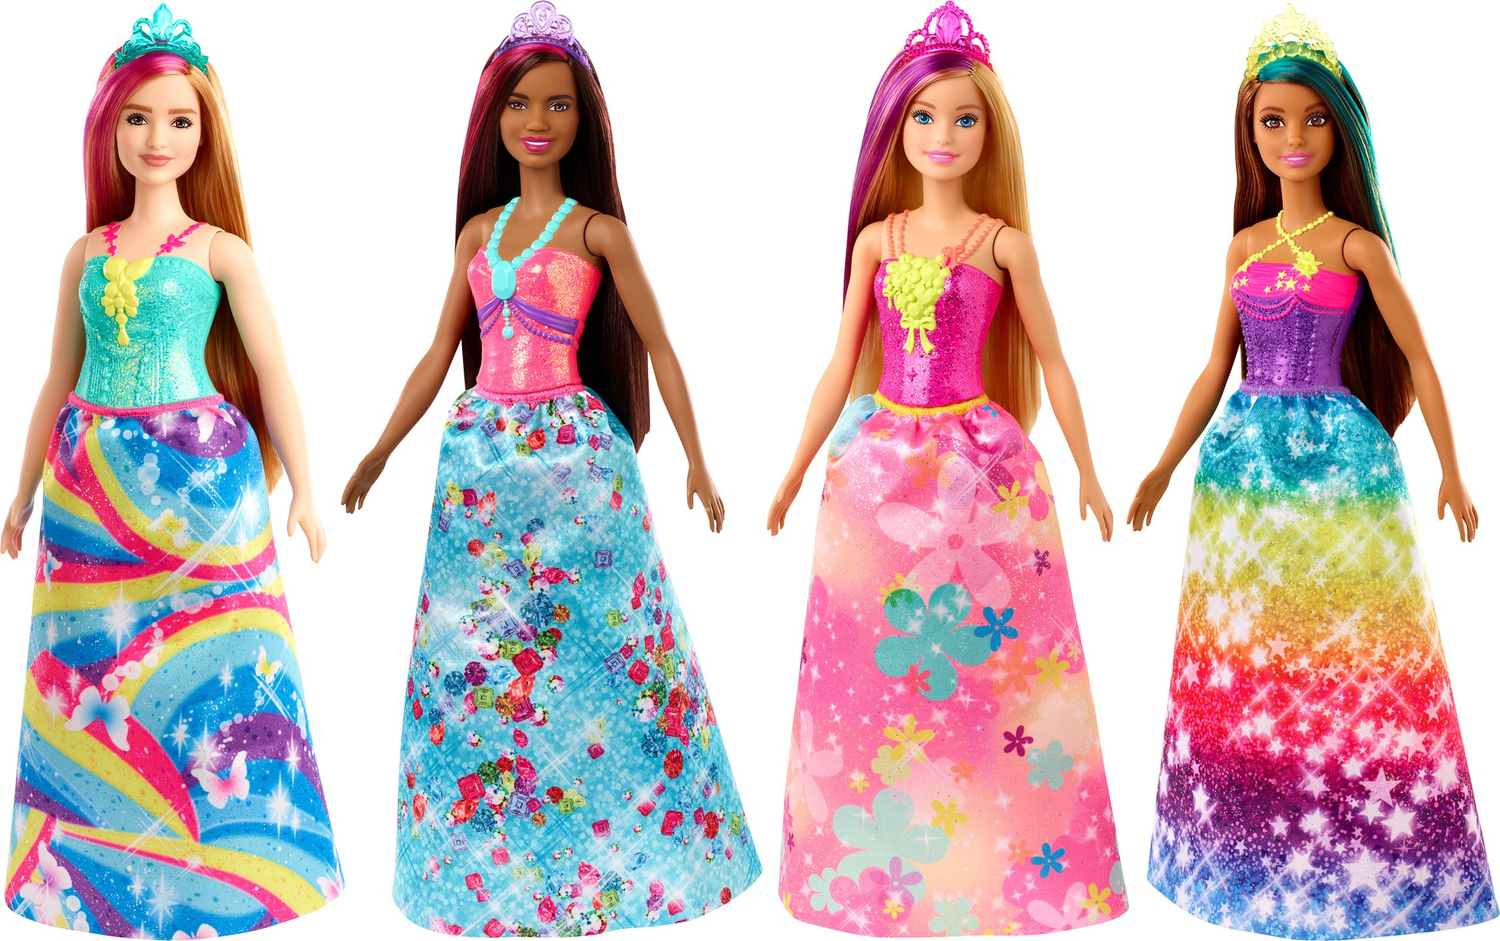 Barbie Dreamtopia Princess Dolls (assorted) - Givens Books and